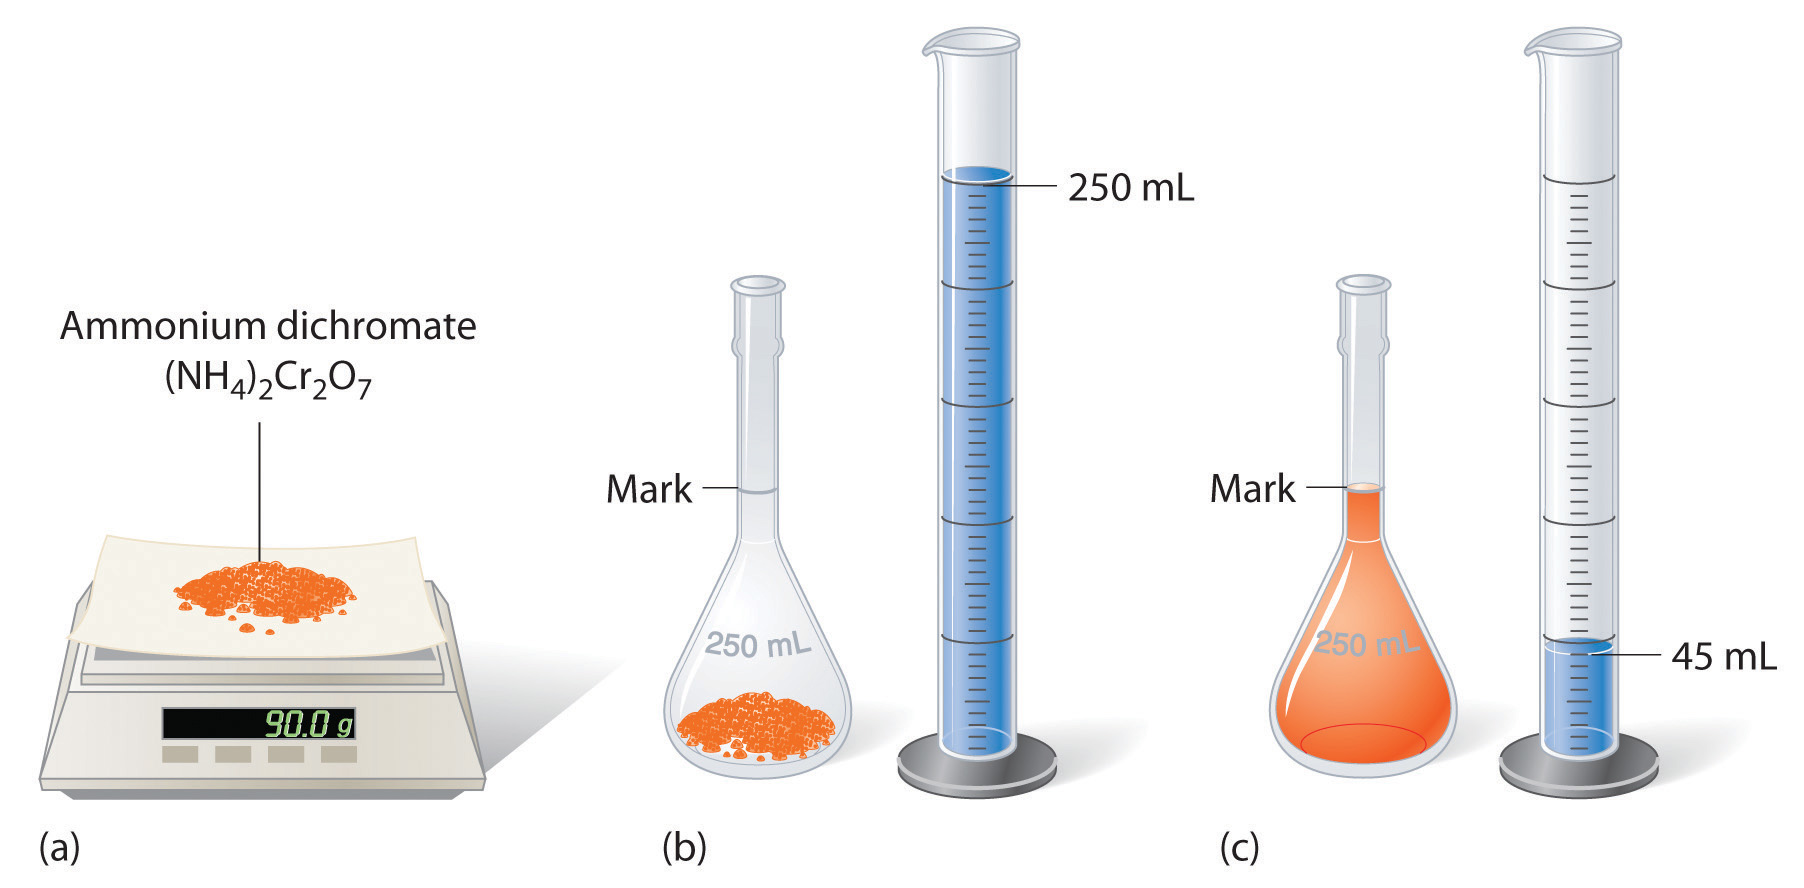 45 milliliters of water remain in the graduated cylinder even after addition to the mark of the volumetric flask. 